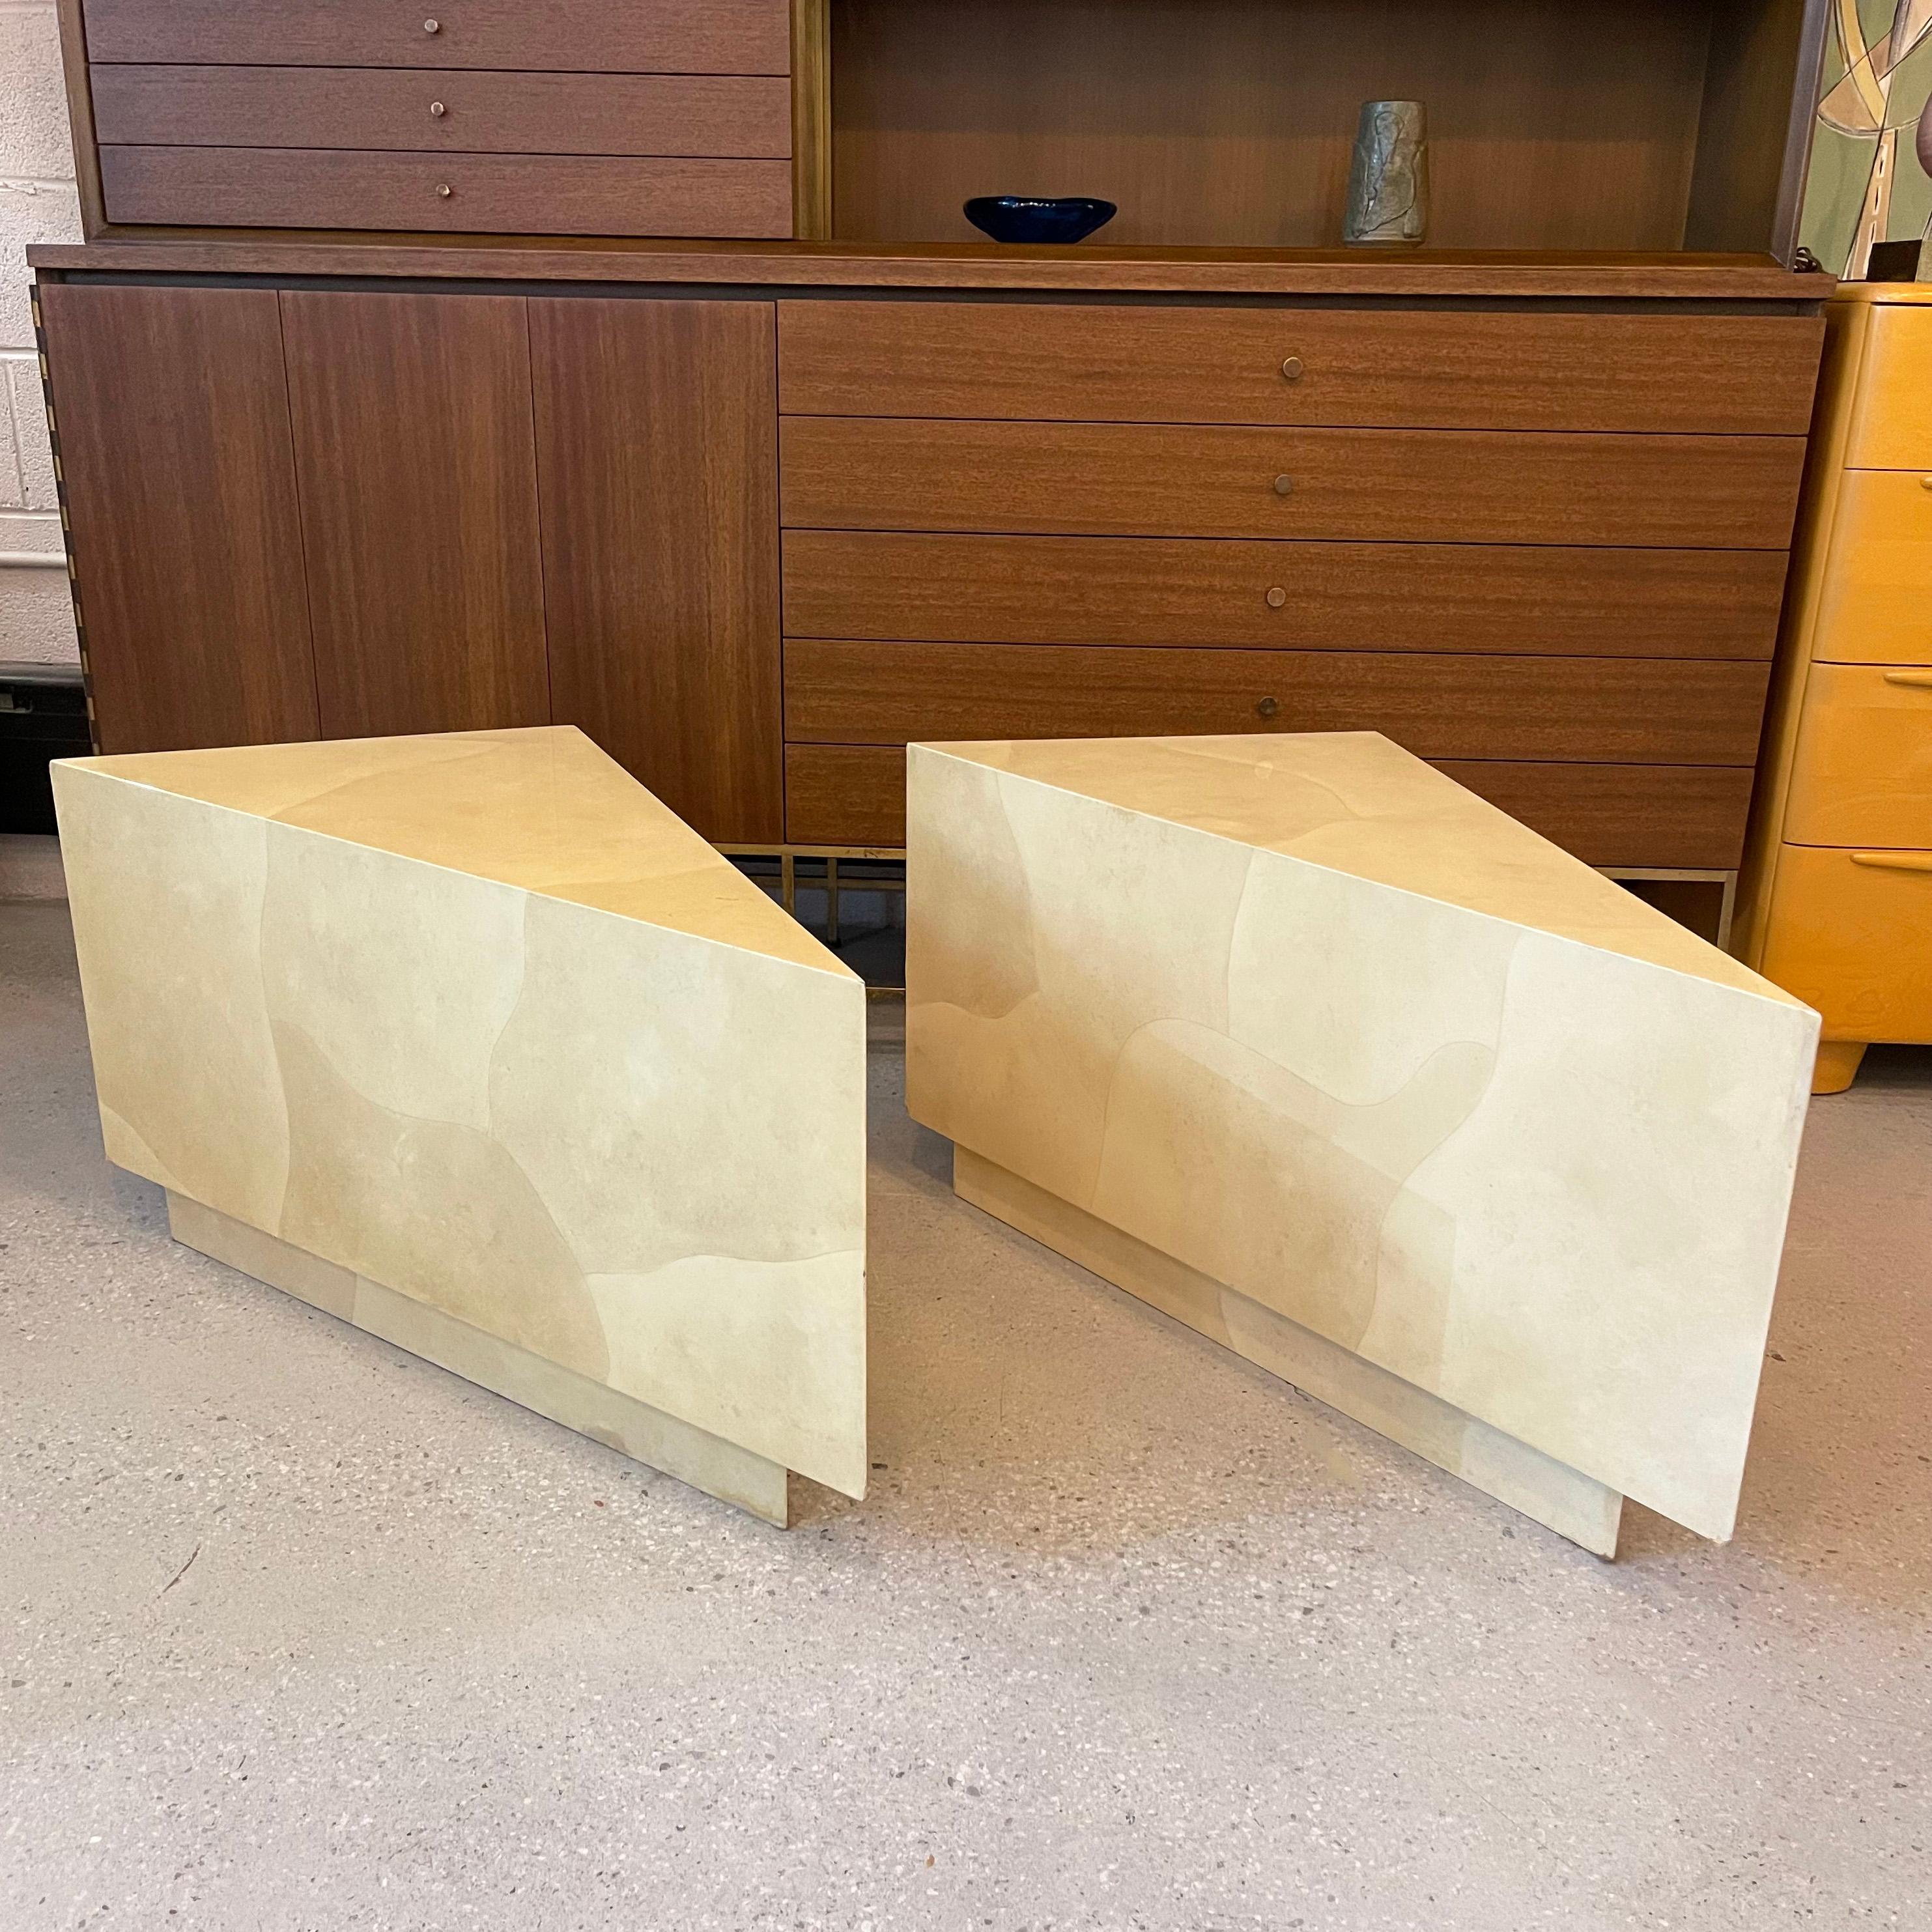 Pair of spectacular and versatile, modular, triangular, lacquered goatskin side tables by Aldo Tura, Italy can be configured individually or together as a coffee table in many forms. Together as a rectangular coffee configuration, the tables measure